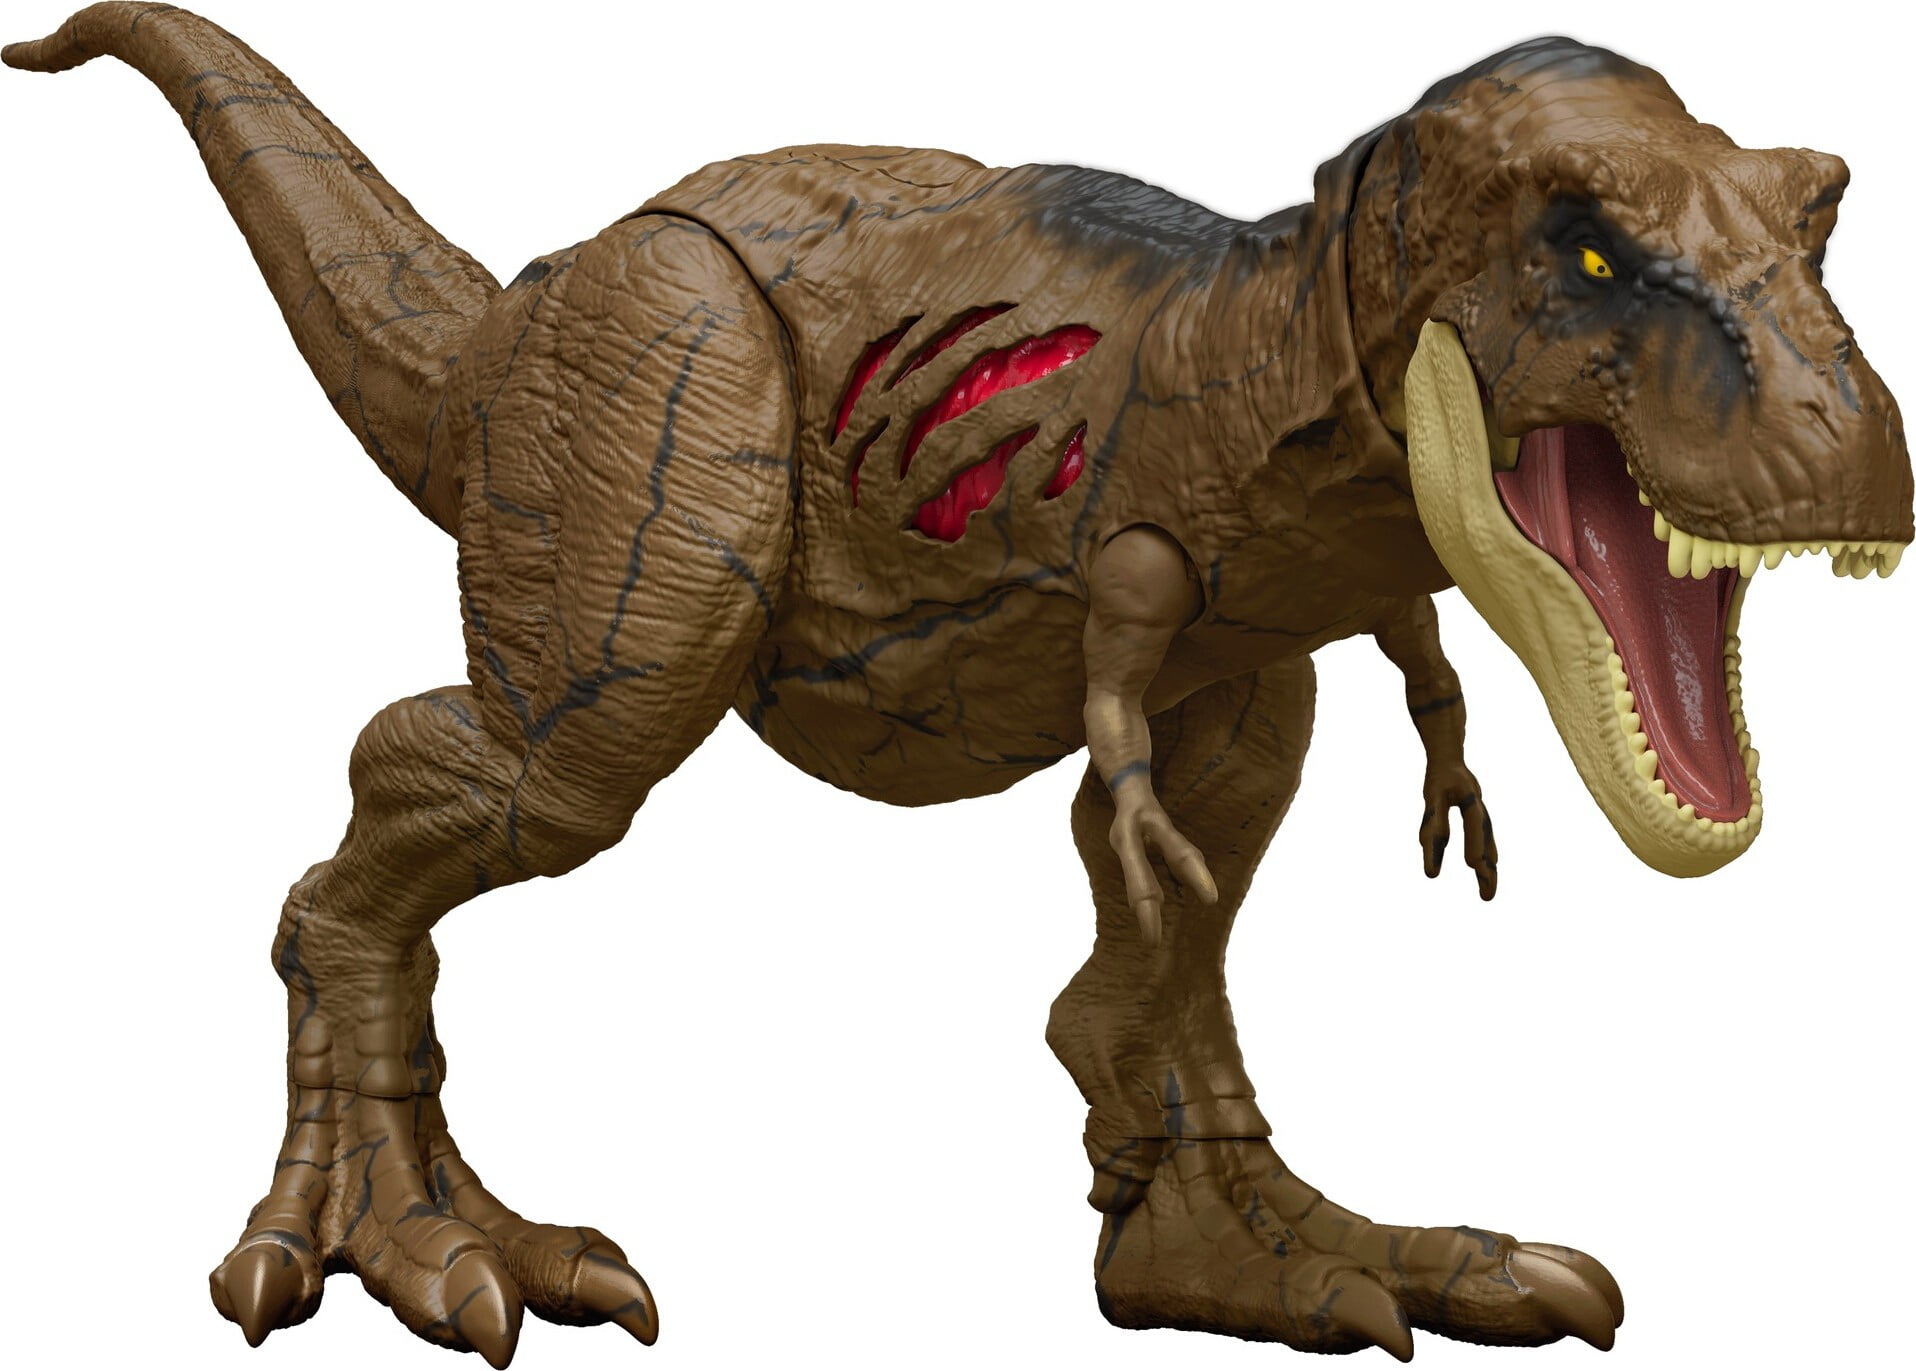 Jurassic World Dominion: Extreme Damage T Rex Dinosaur Action Figure Toy for Battle Play